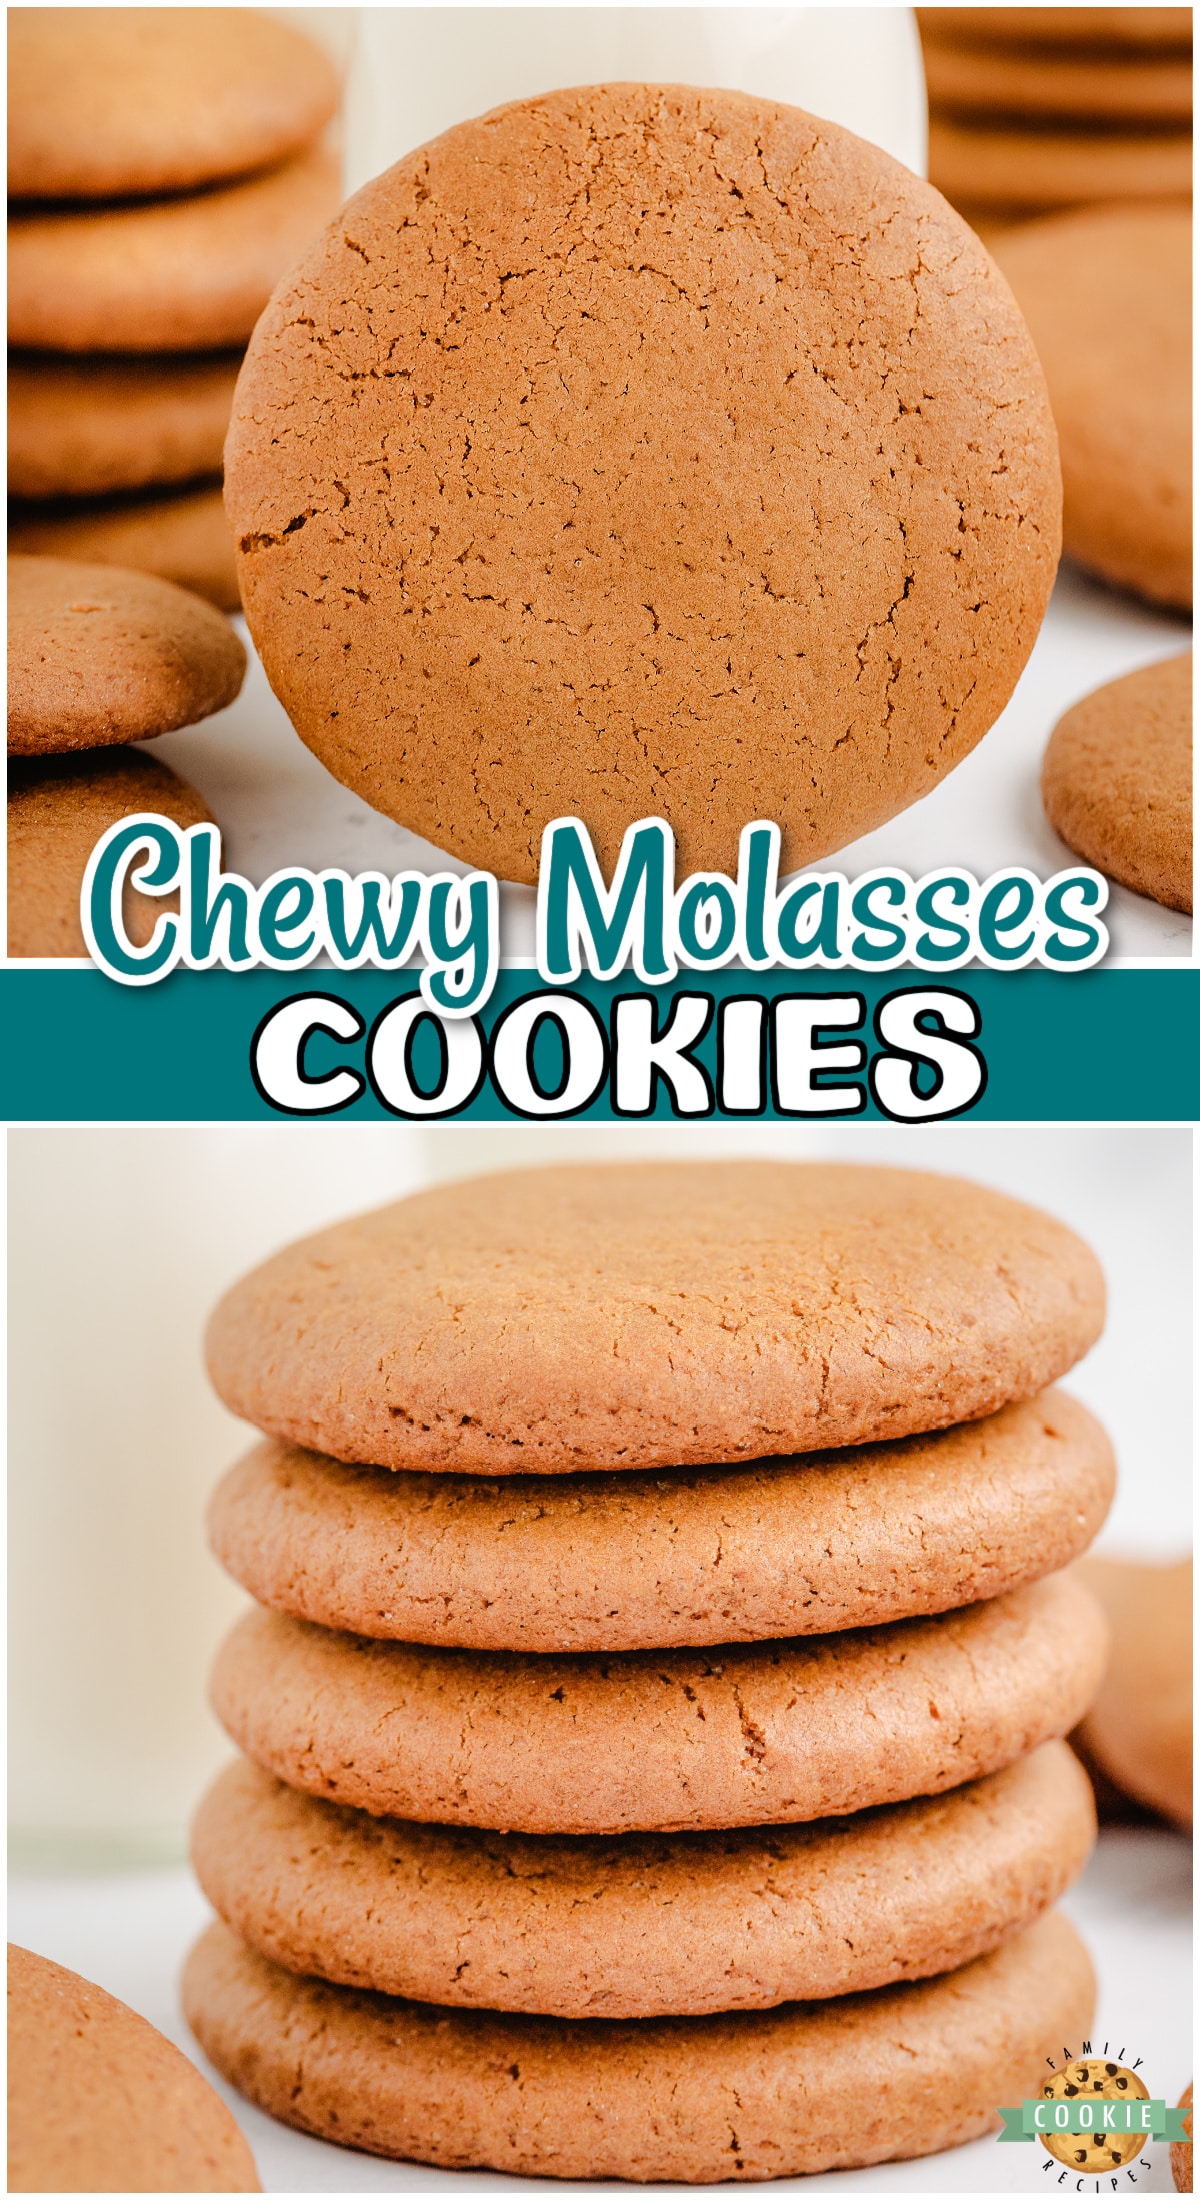 Homemade Molasses Cookies have incredible flavor & a soft, chewy texture! Simple soft molasses cookies let the molasses flavor shine through; everyone loves them!